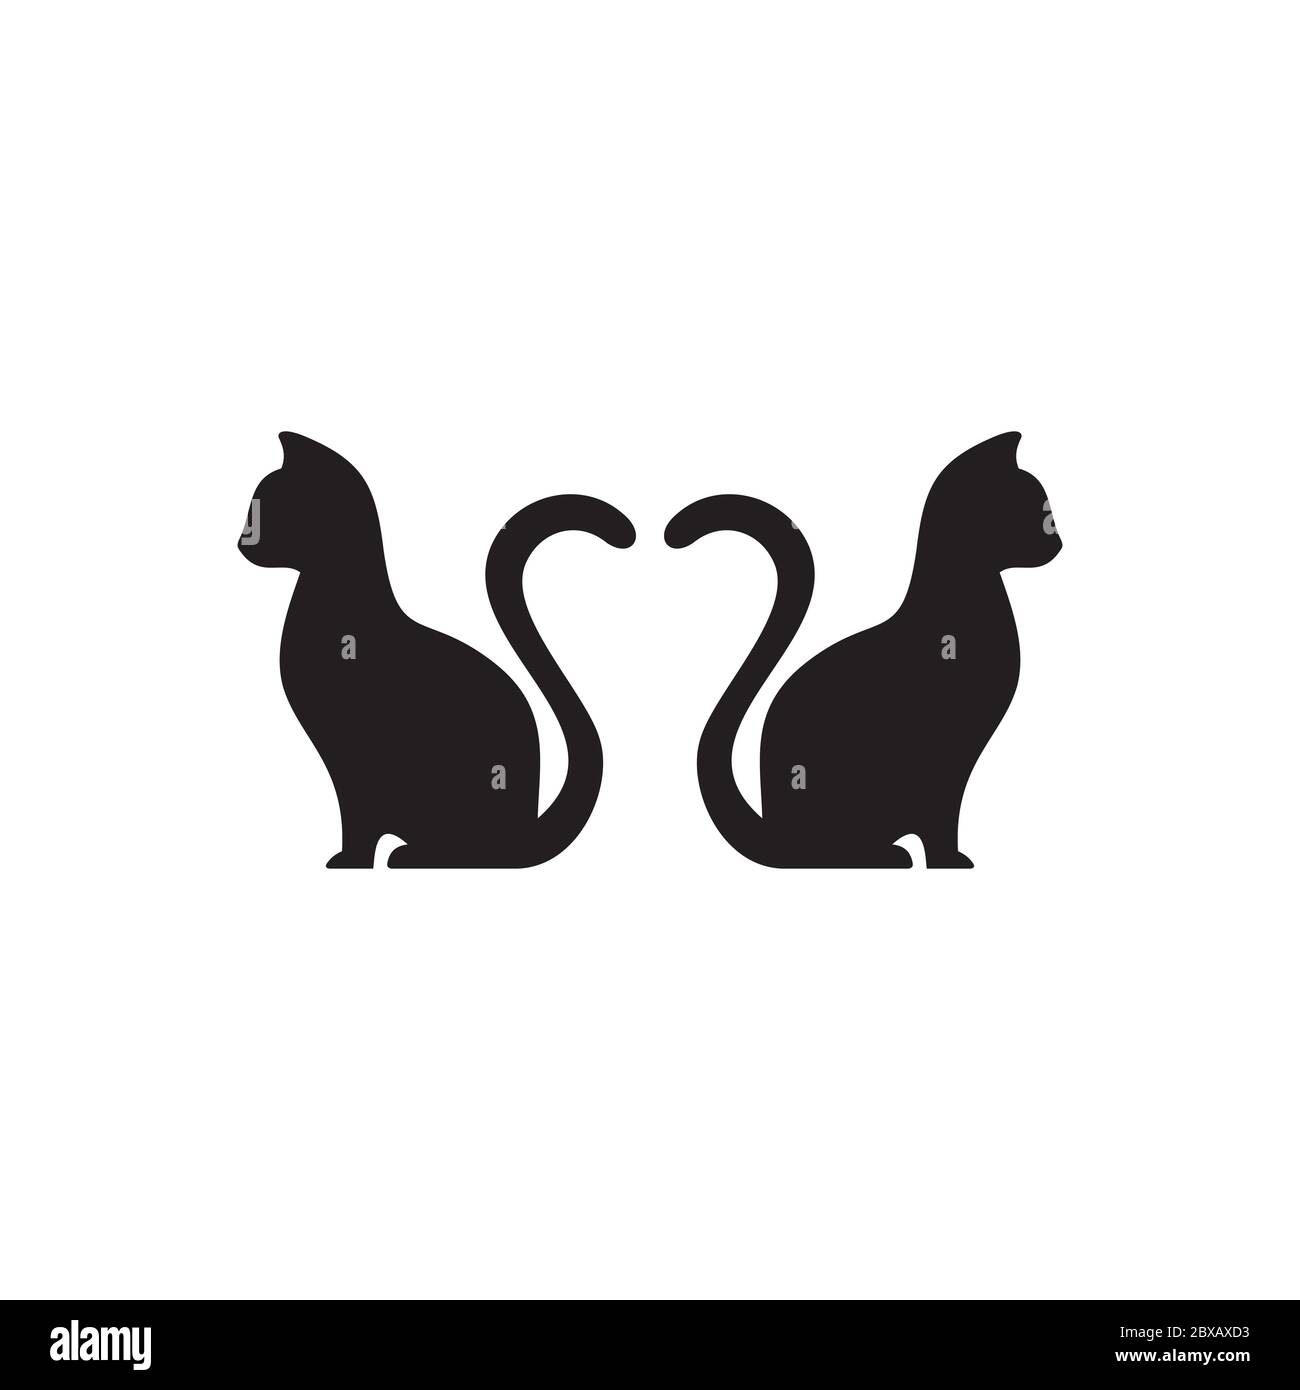 two cats icon symbol vector isolated on white background Stock Vector